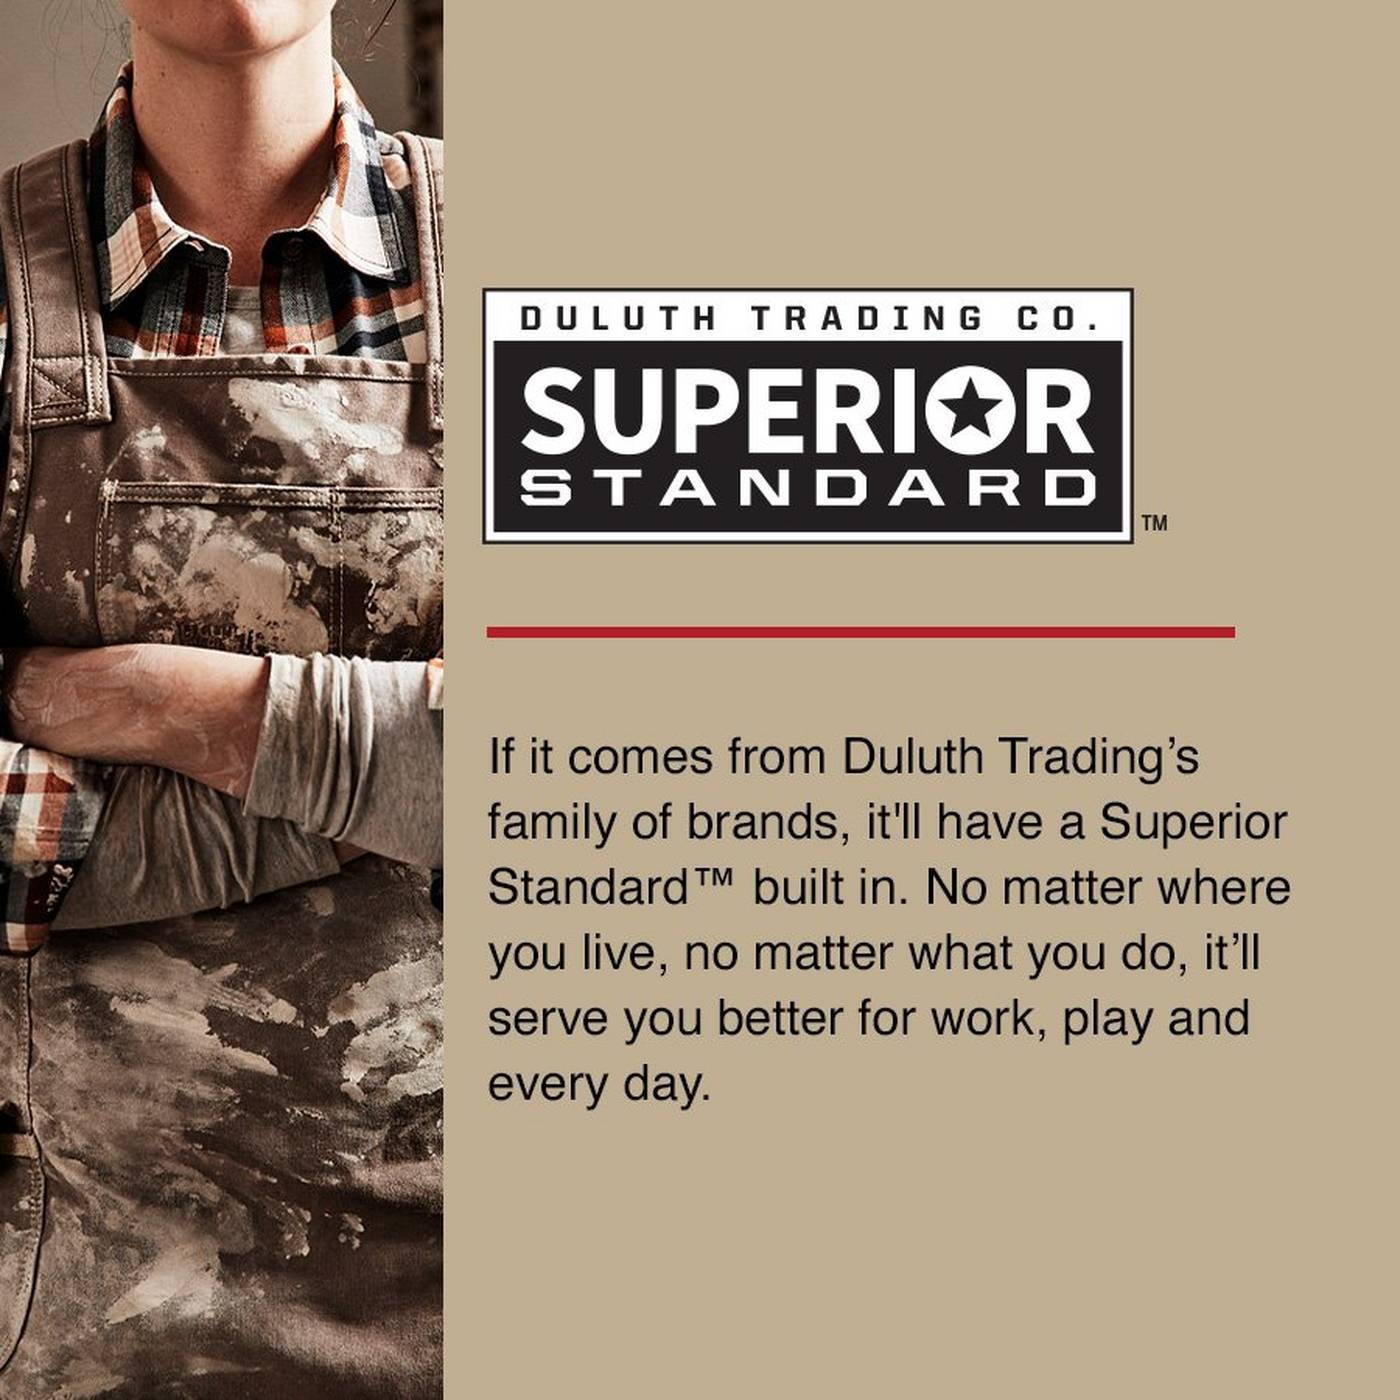 Duluth Trading Company - The selling point of these is of course